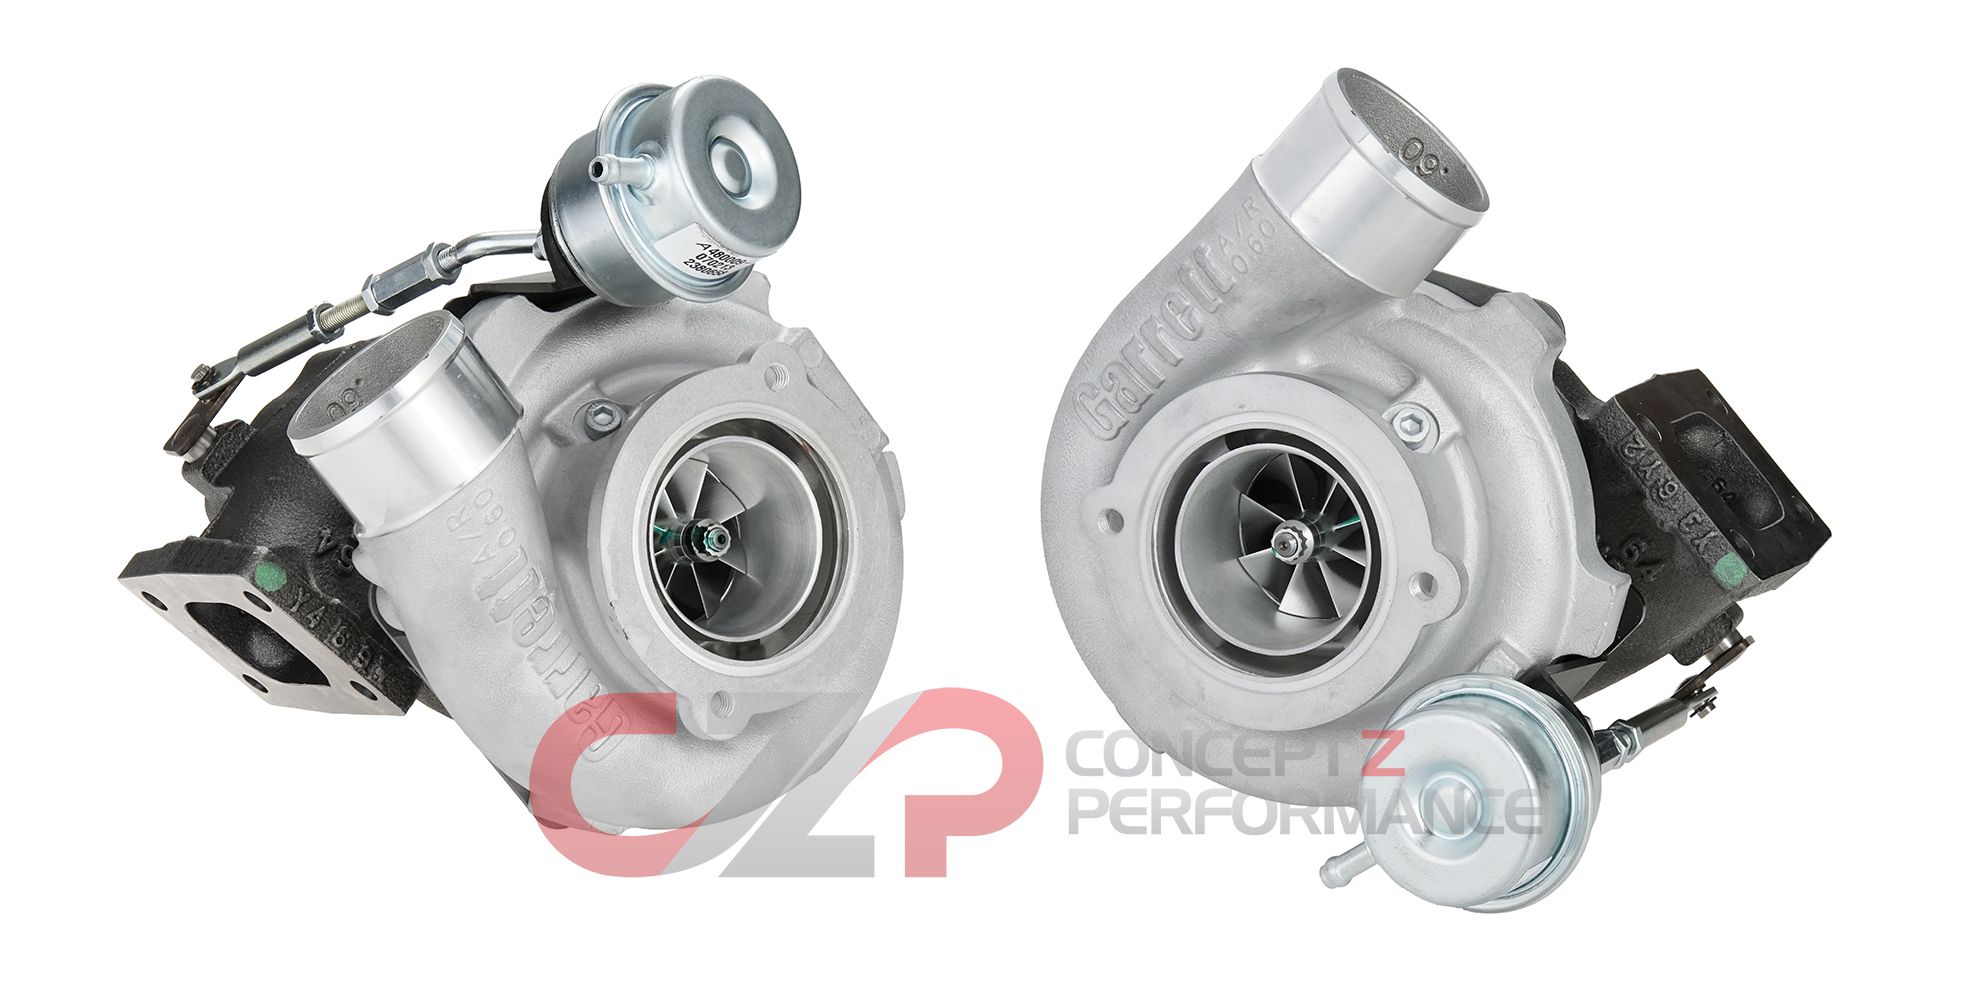 Forced Induction :: Turbochargers & Turbo Kits :: Complete Turbo 